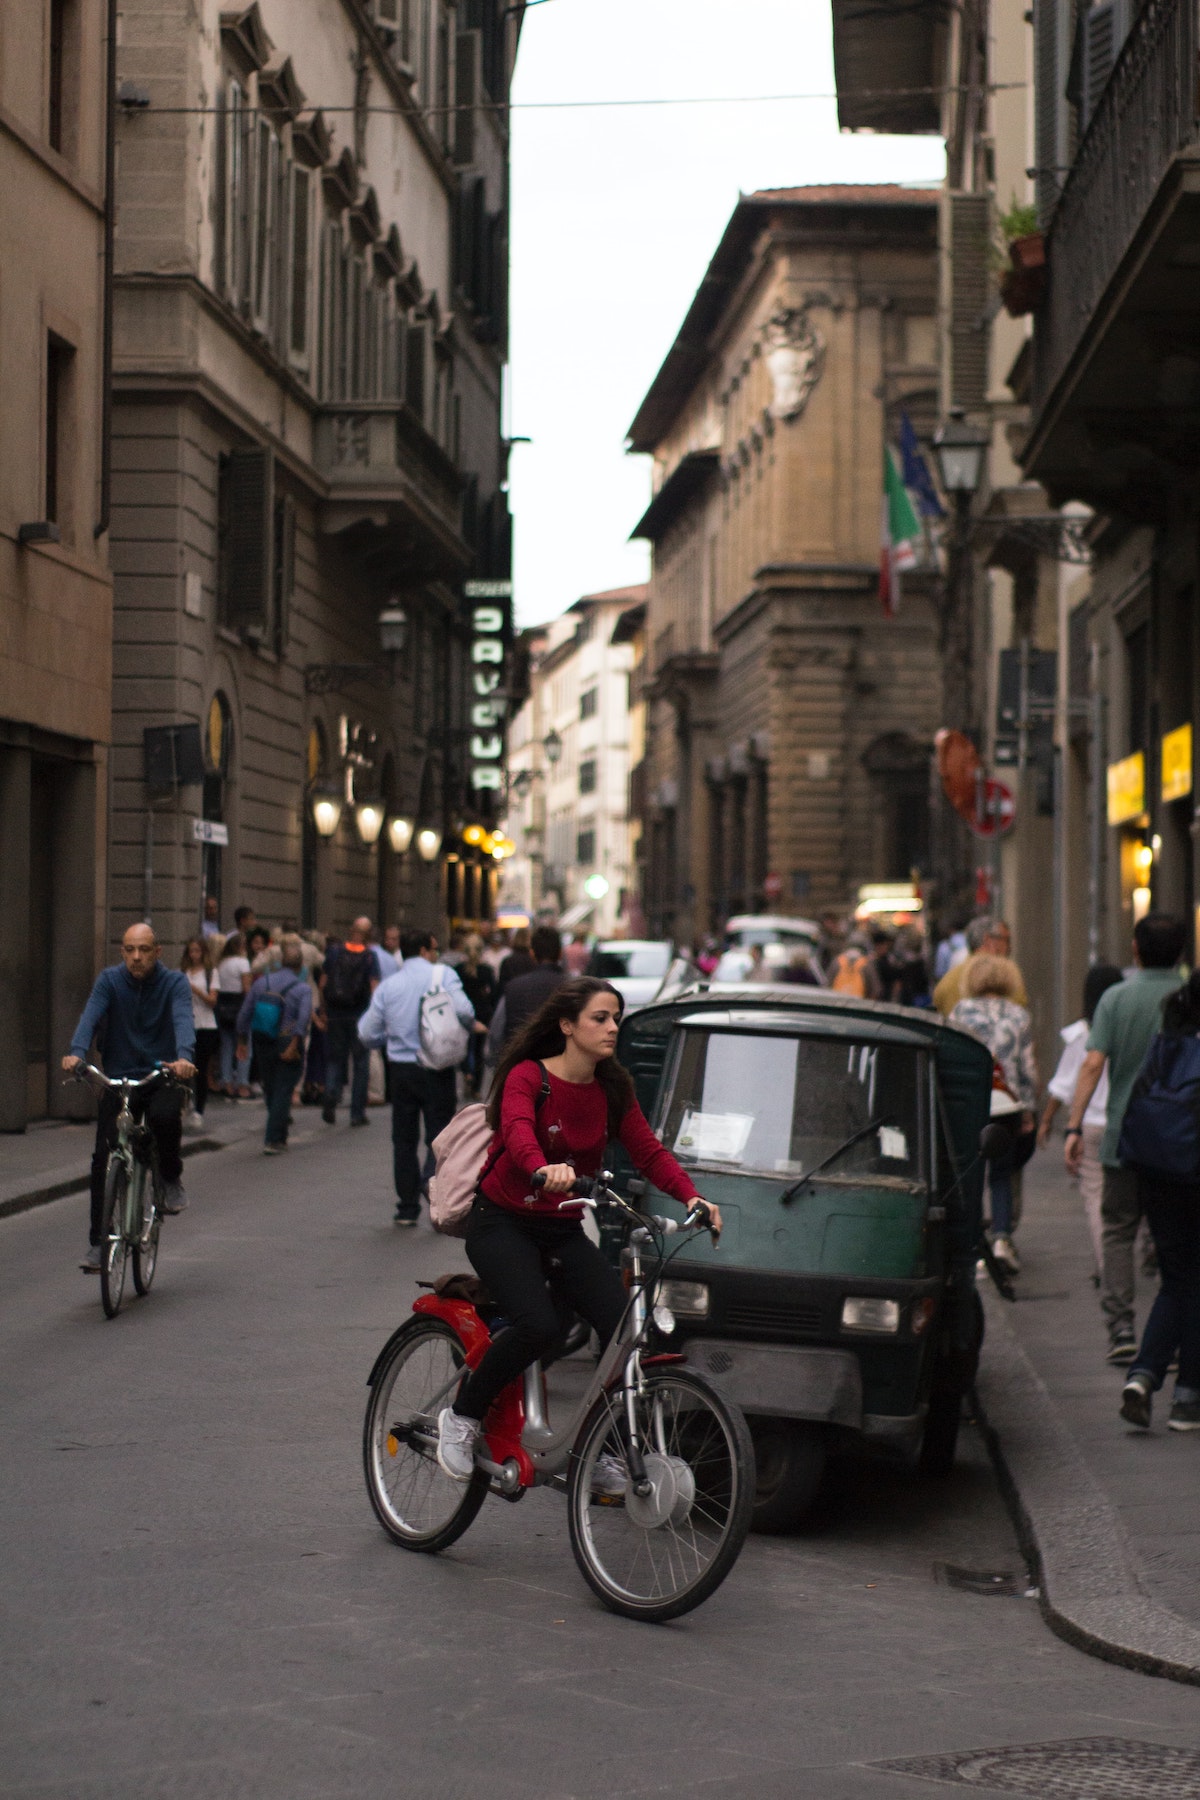 Woman in a red shirt riding a bike on a busy city street